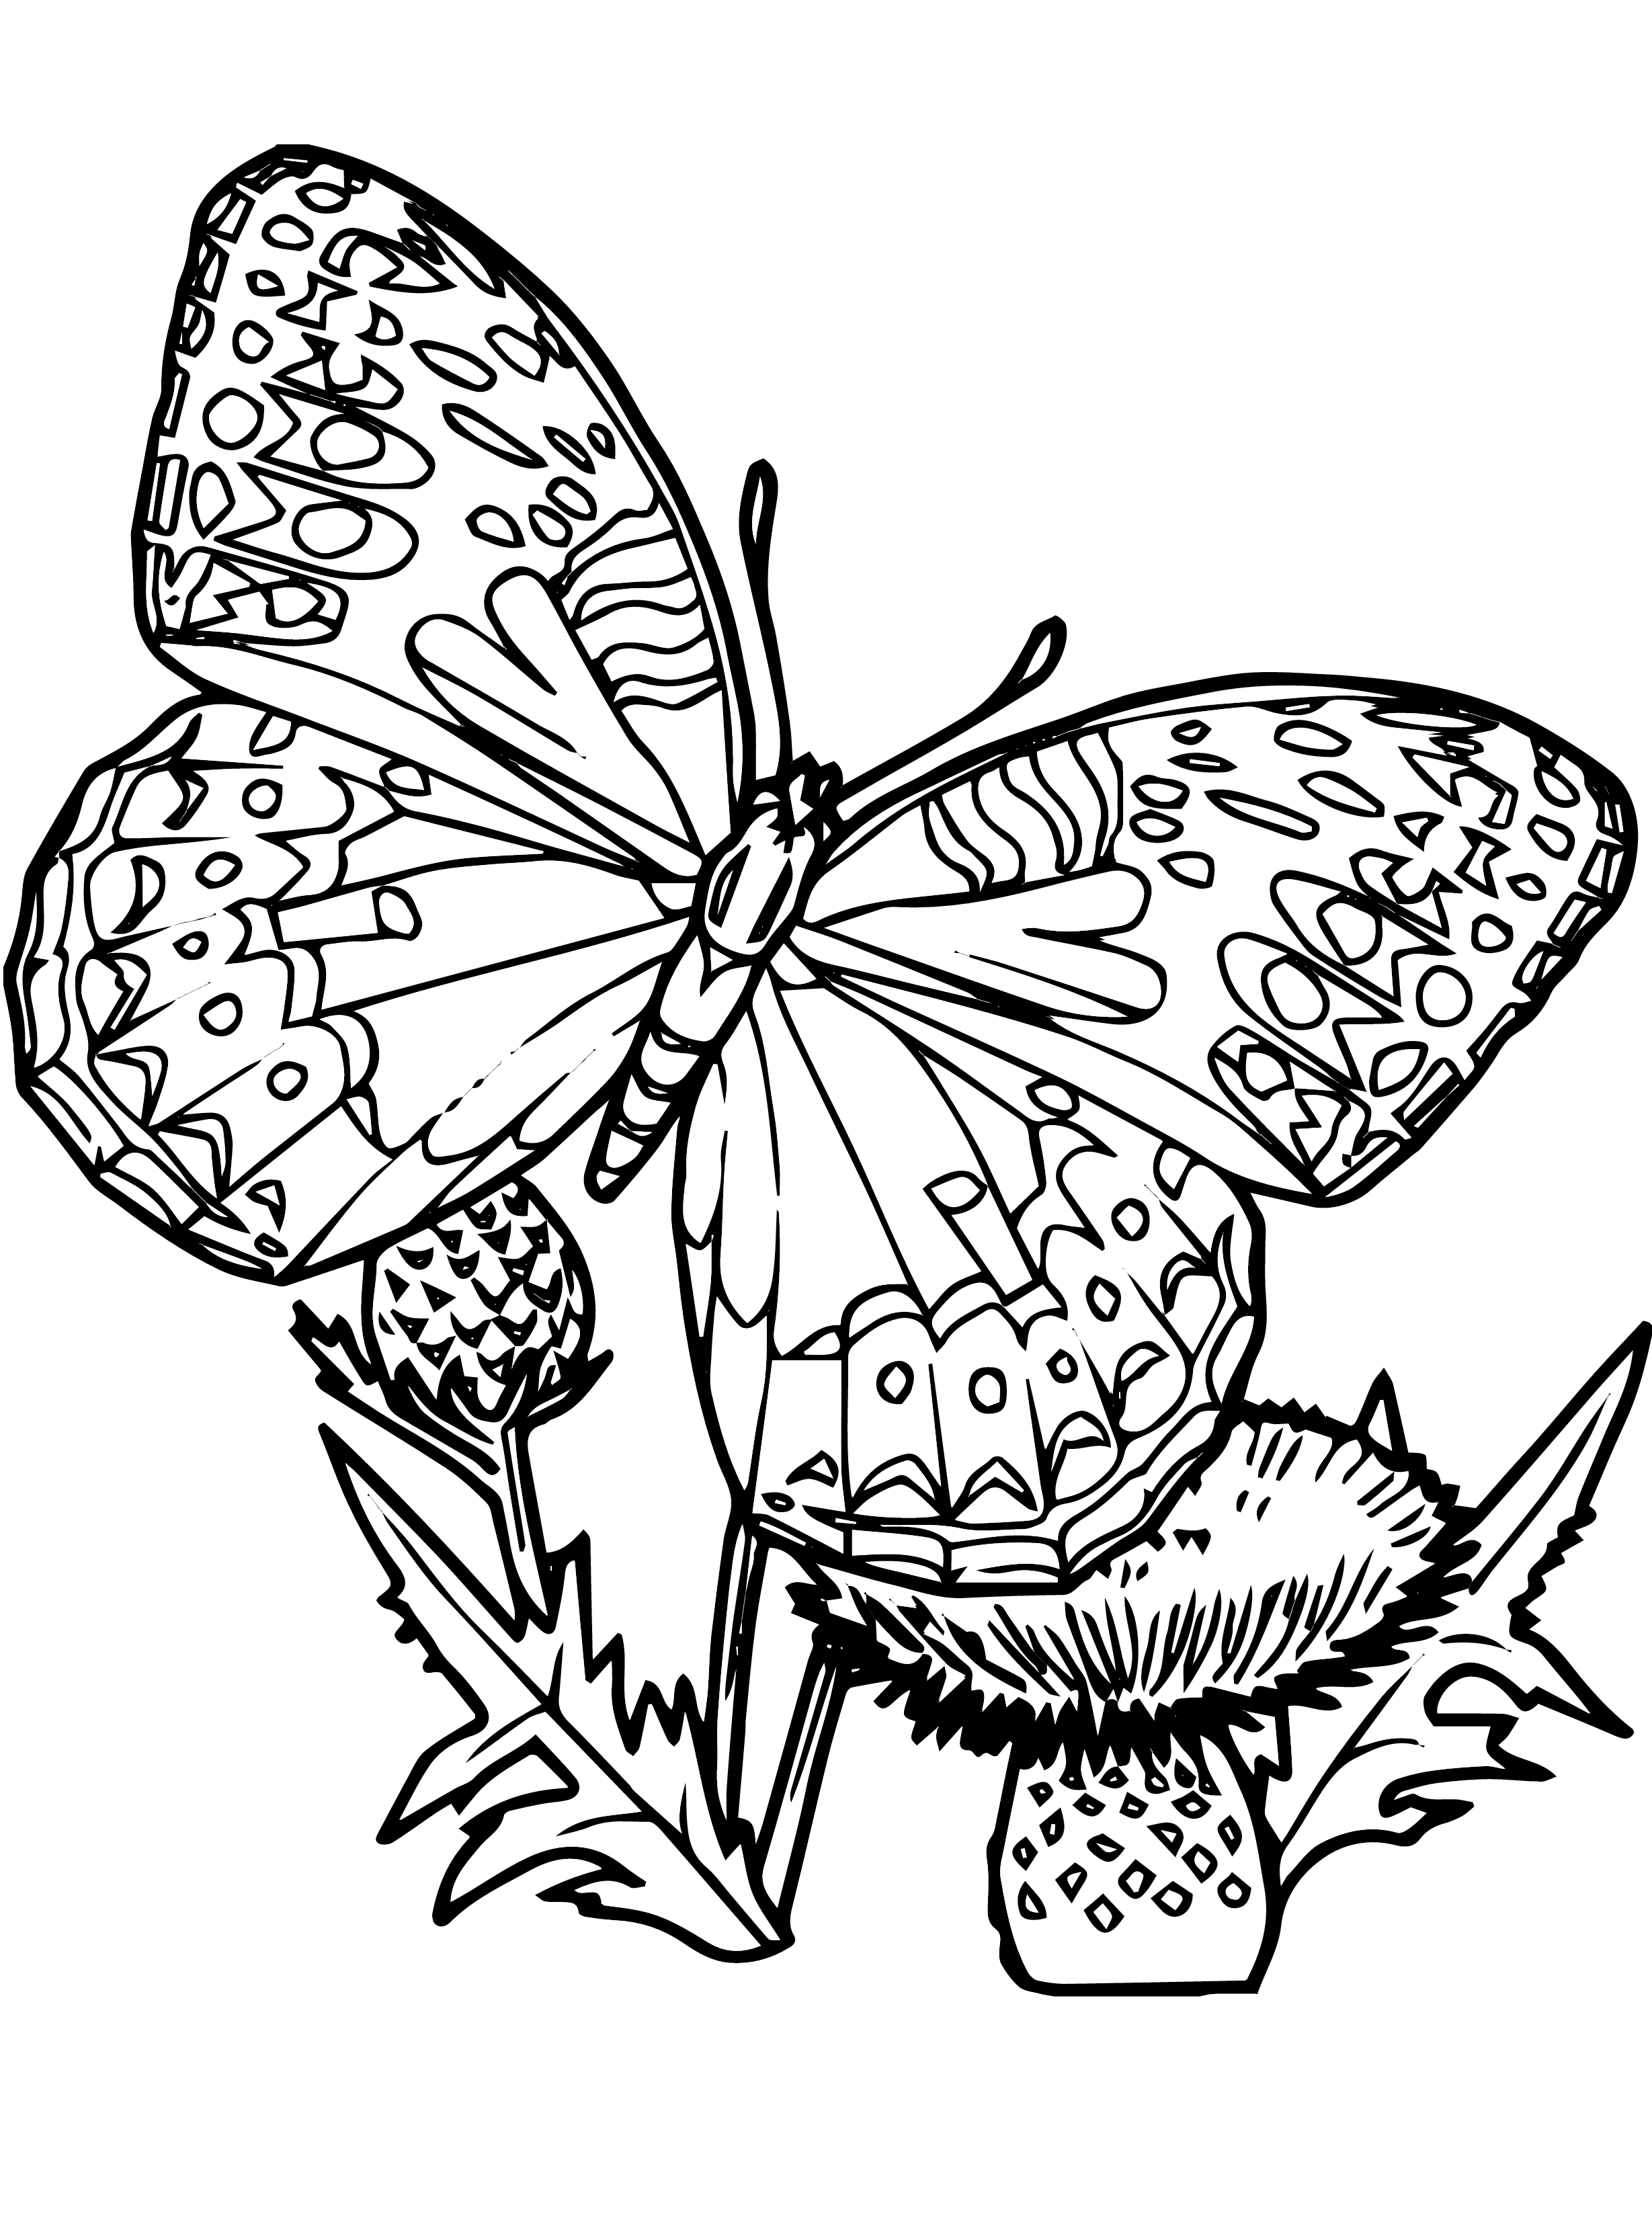 coloring-pages-of-butterflies-butterflies-coloring-pages-random-coloring